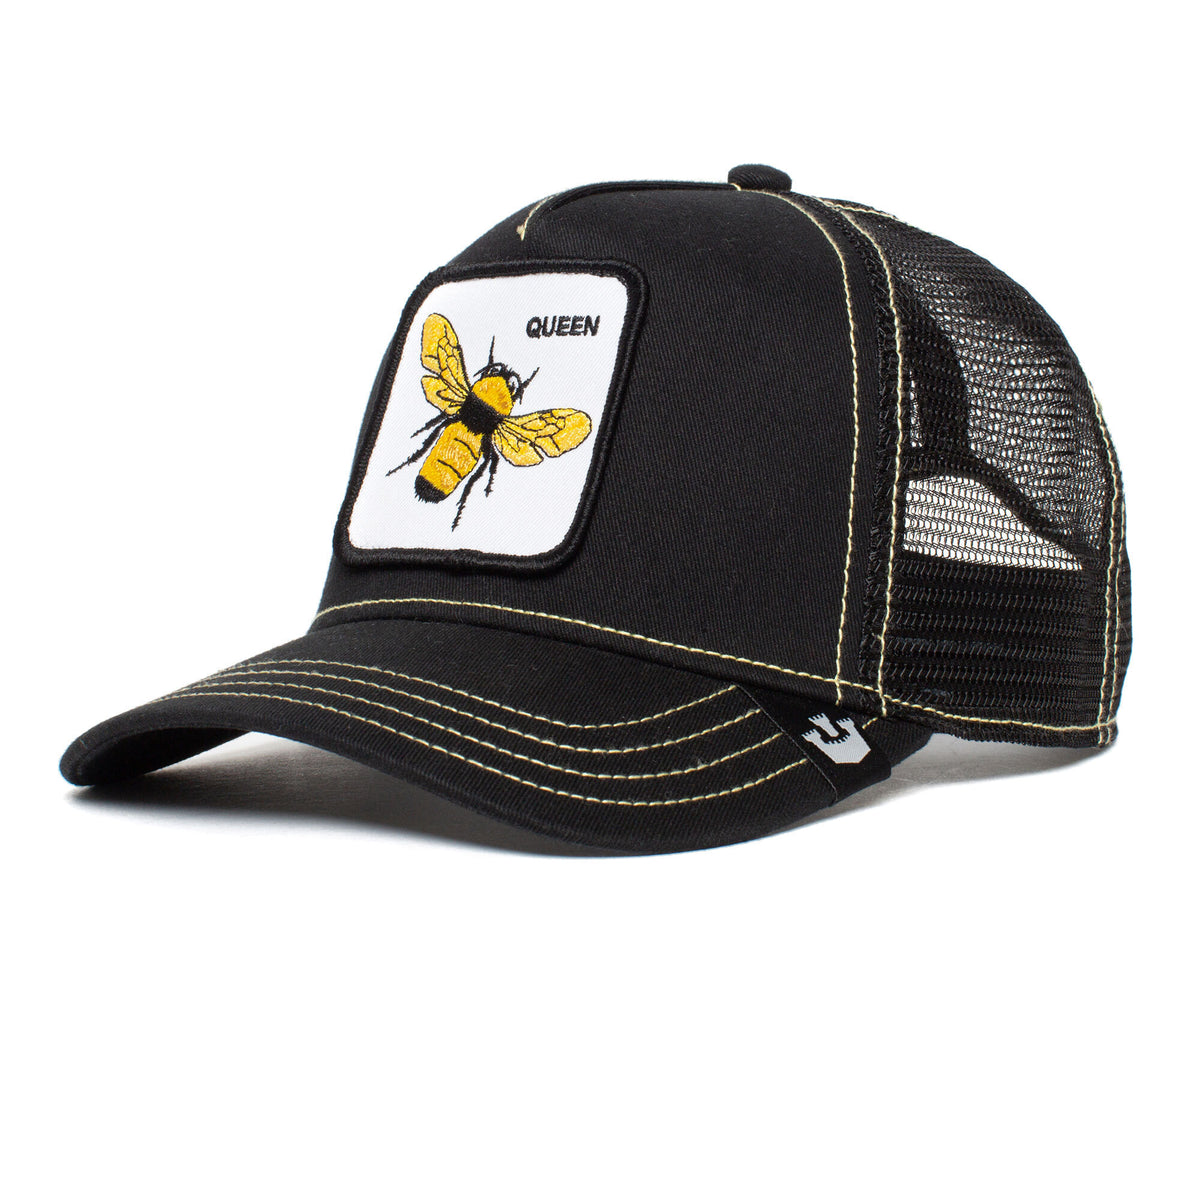 The Queen Bee - The Farm by Goorin Bros.“ Official Trucker Hat